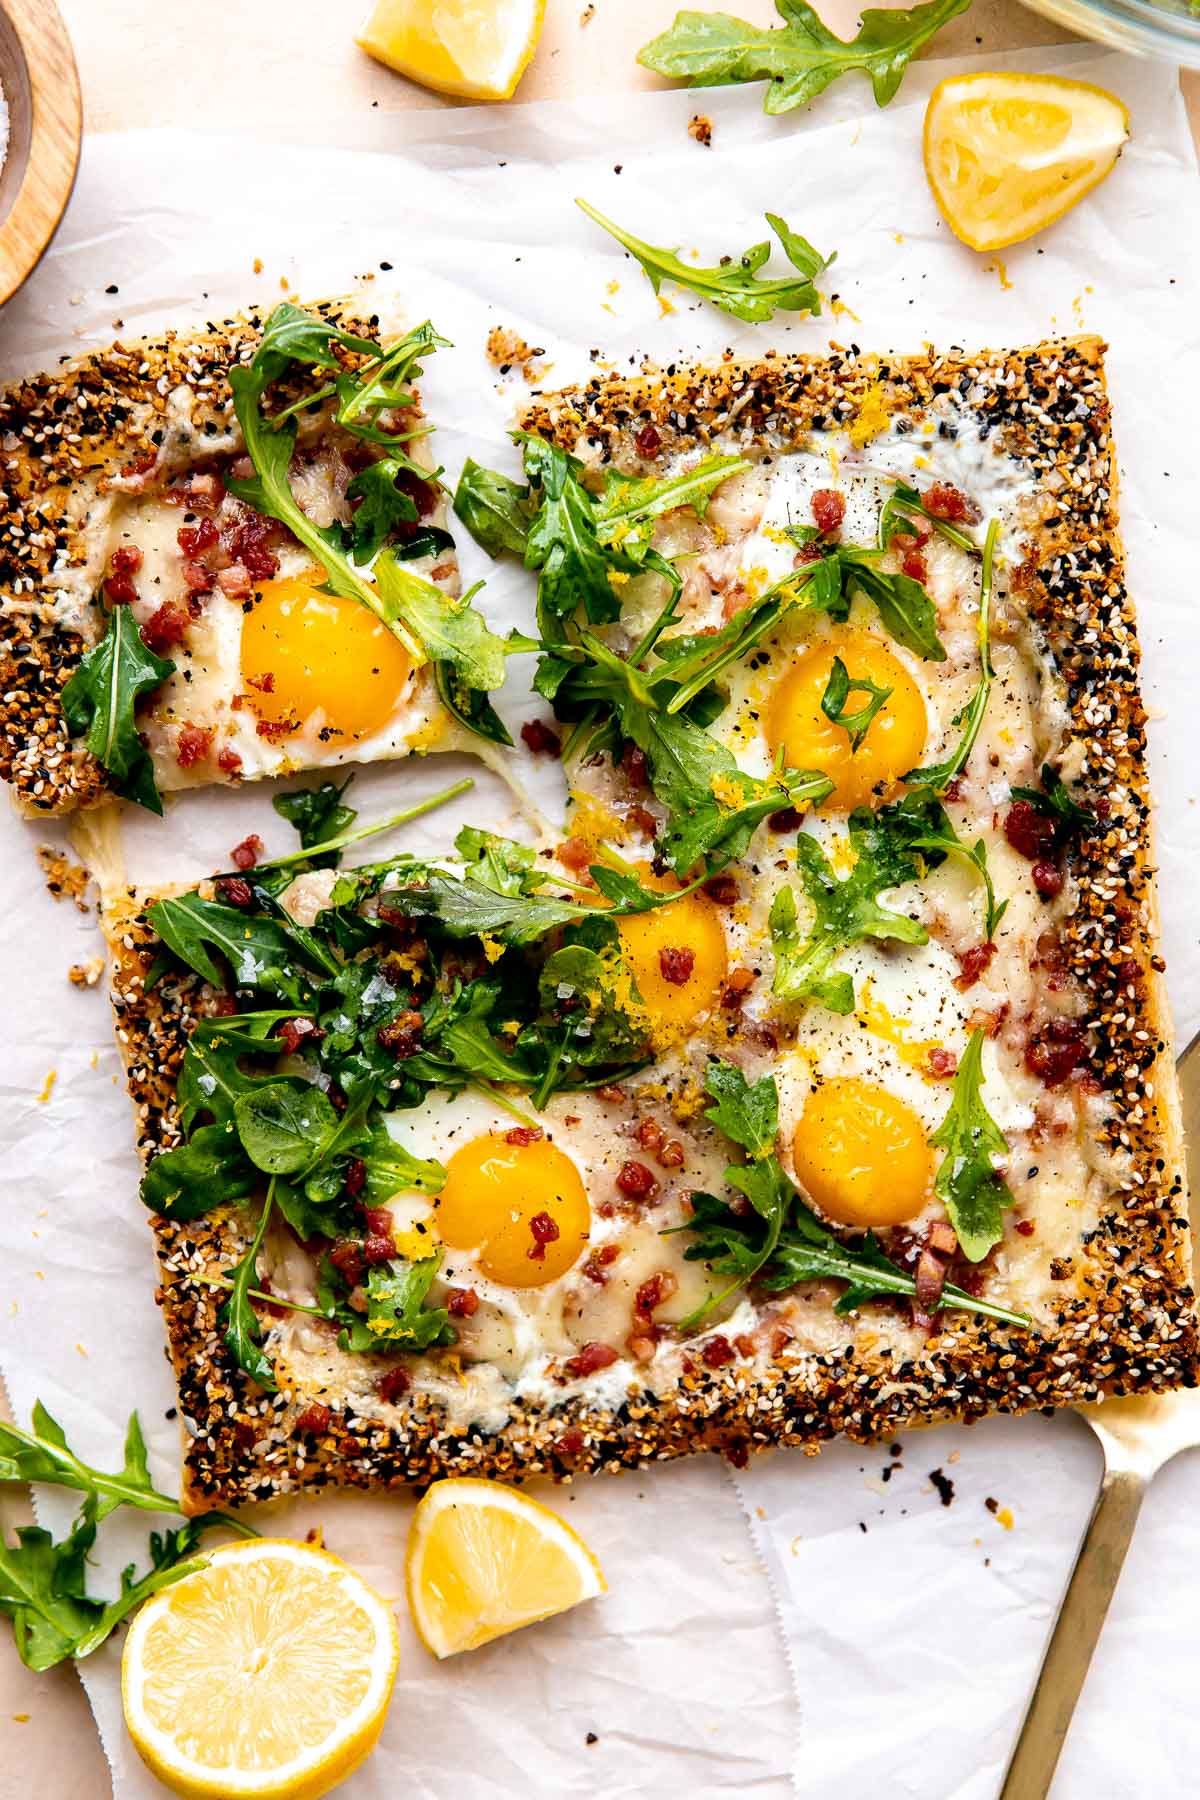 A finished breakfast pizza is served atop a piece of parchment paper and rests atop a peach colored textured surface. The pizza has been garnished with arugula lightly dressed in olive oil, lemon zest, kosher salt, and ground black pepper. Quartered and halved pieces of lemon along with loose arugula leaves surround the pizza along with a small wooden pinch bowl filled with kosher salt, a clear glass bowl filled with arugula, and a gold serving utensil. A slice of pizza has been cut for serving and is slightly separated from the rest of the breakfast pizza.